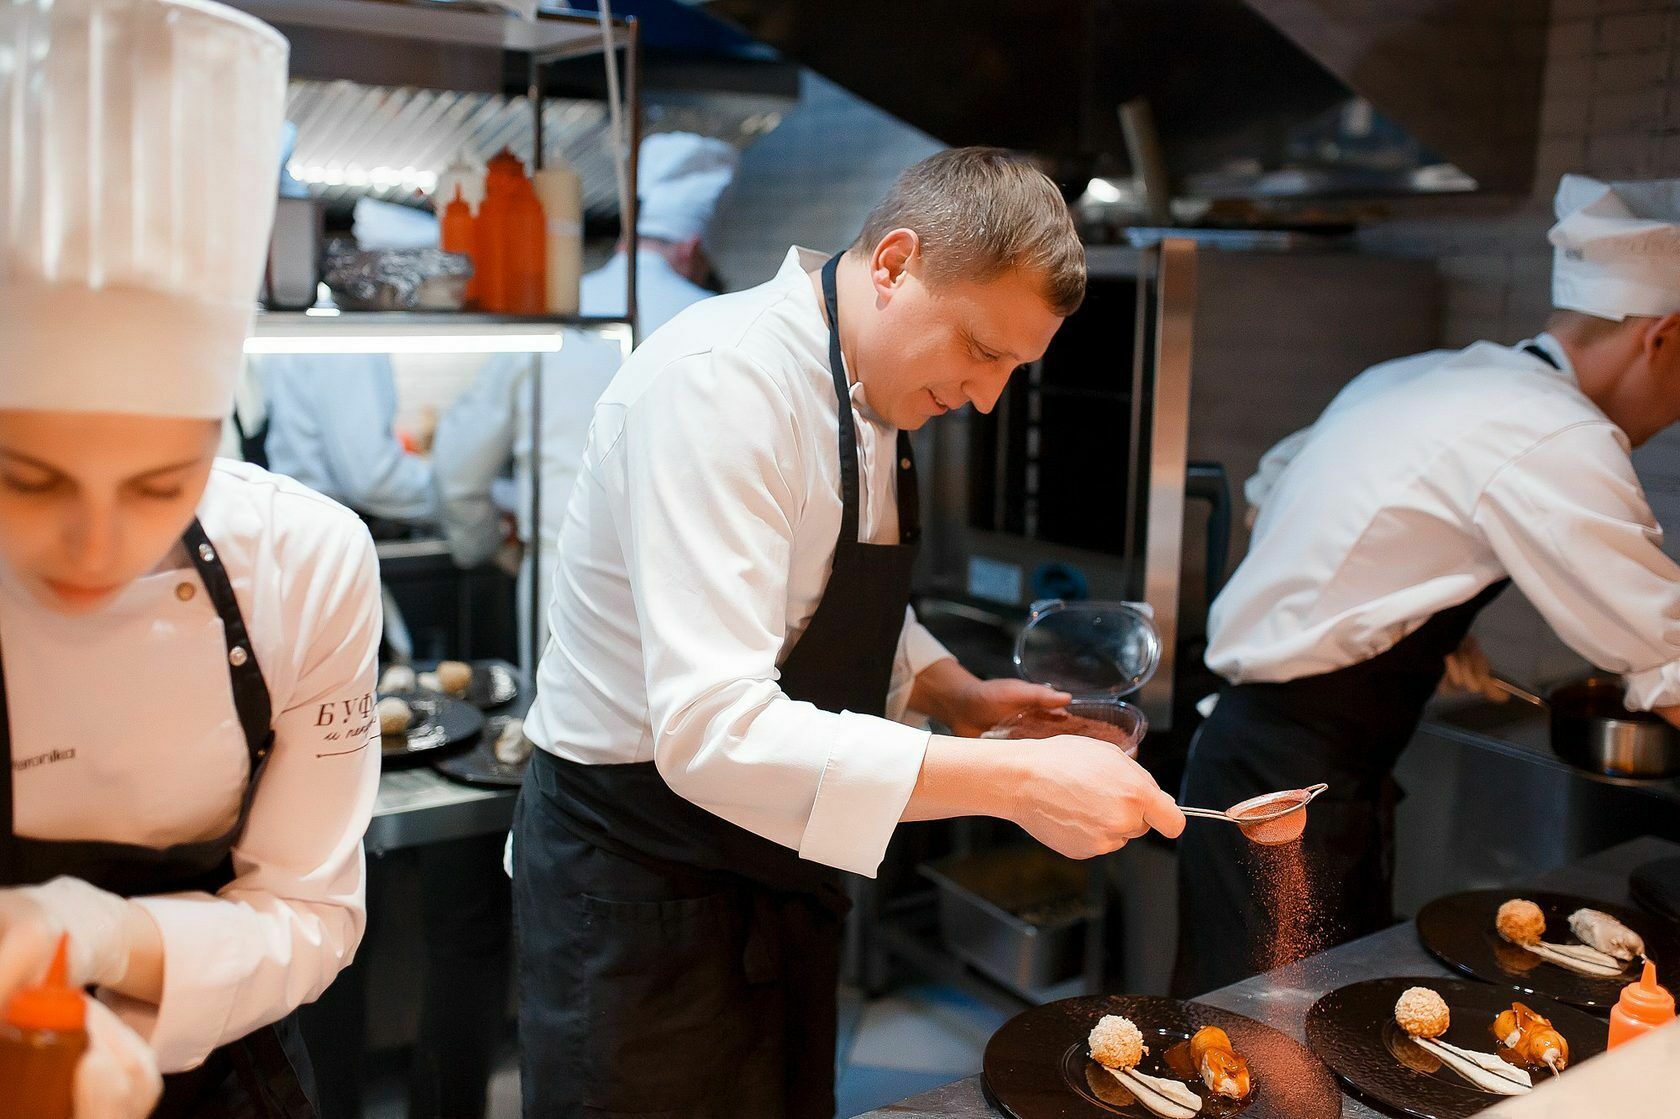 Chefs and waiters are urgently needed! Restaurateurs faced a staff shortage